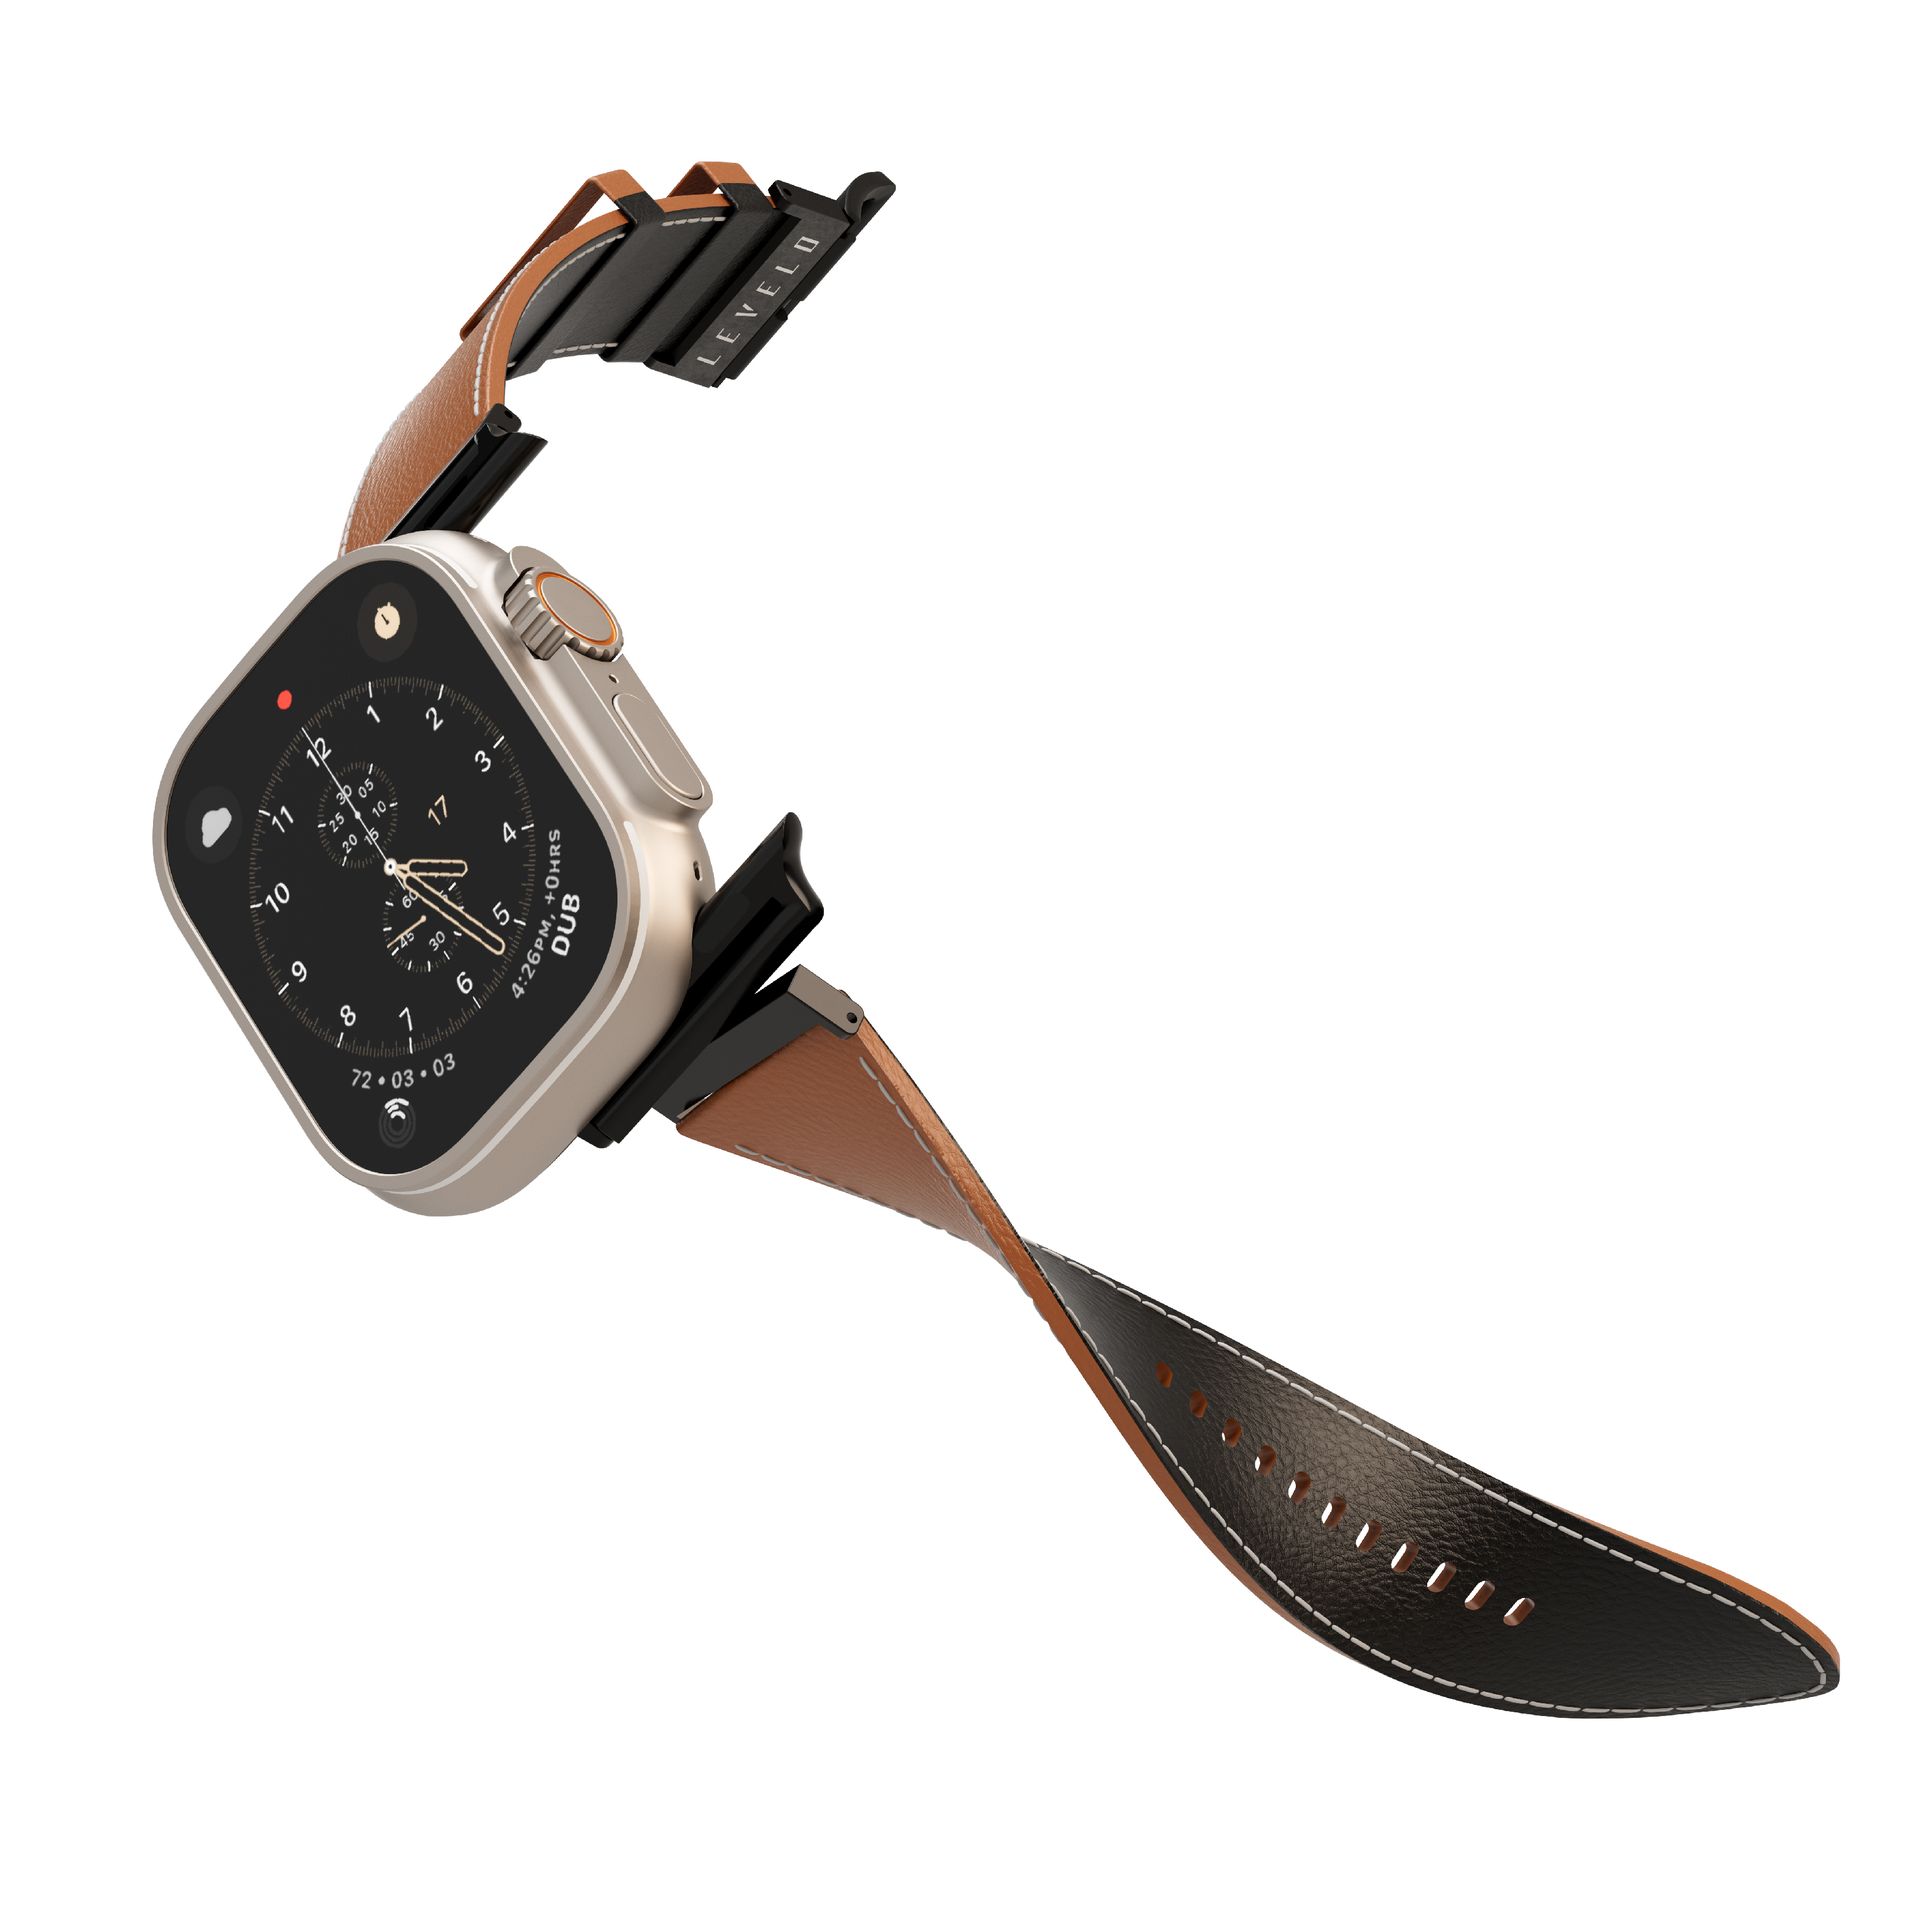 alt="best leather strap for smart watch"